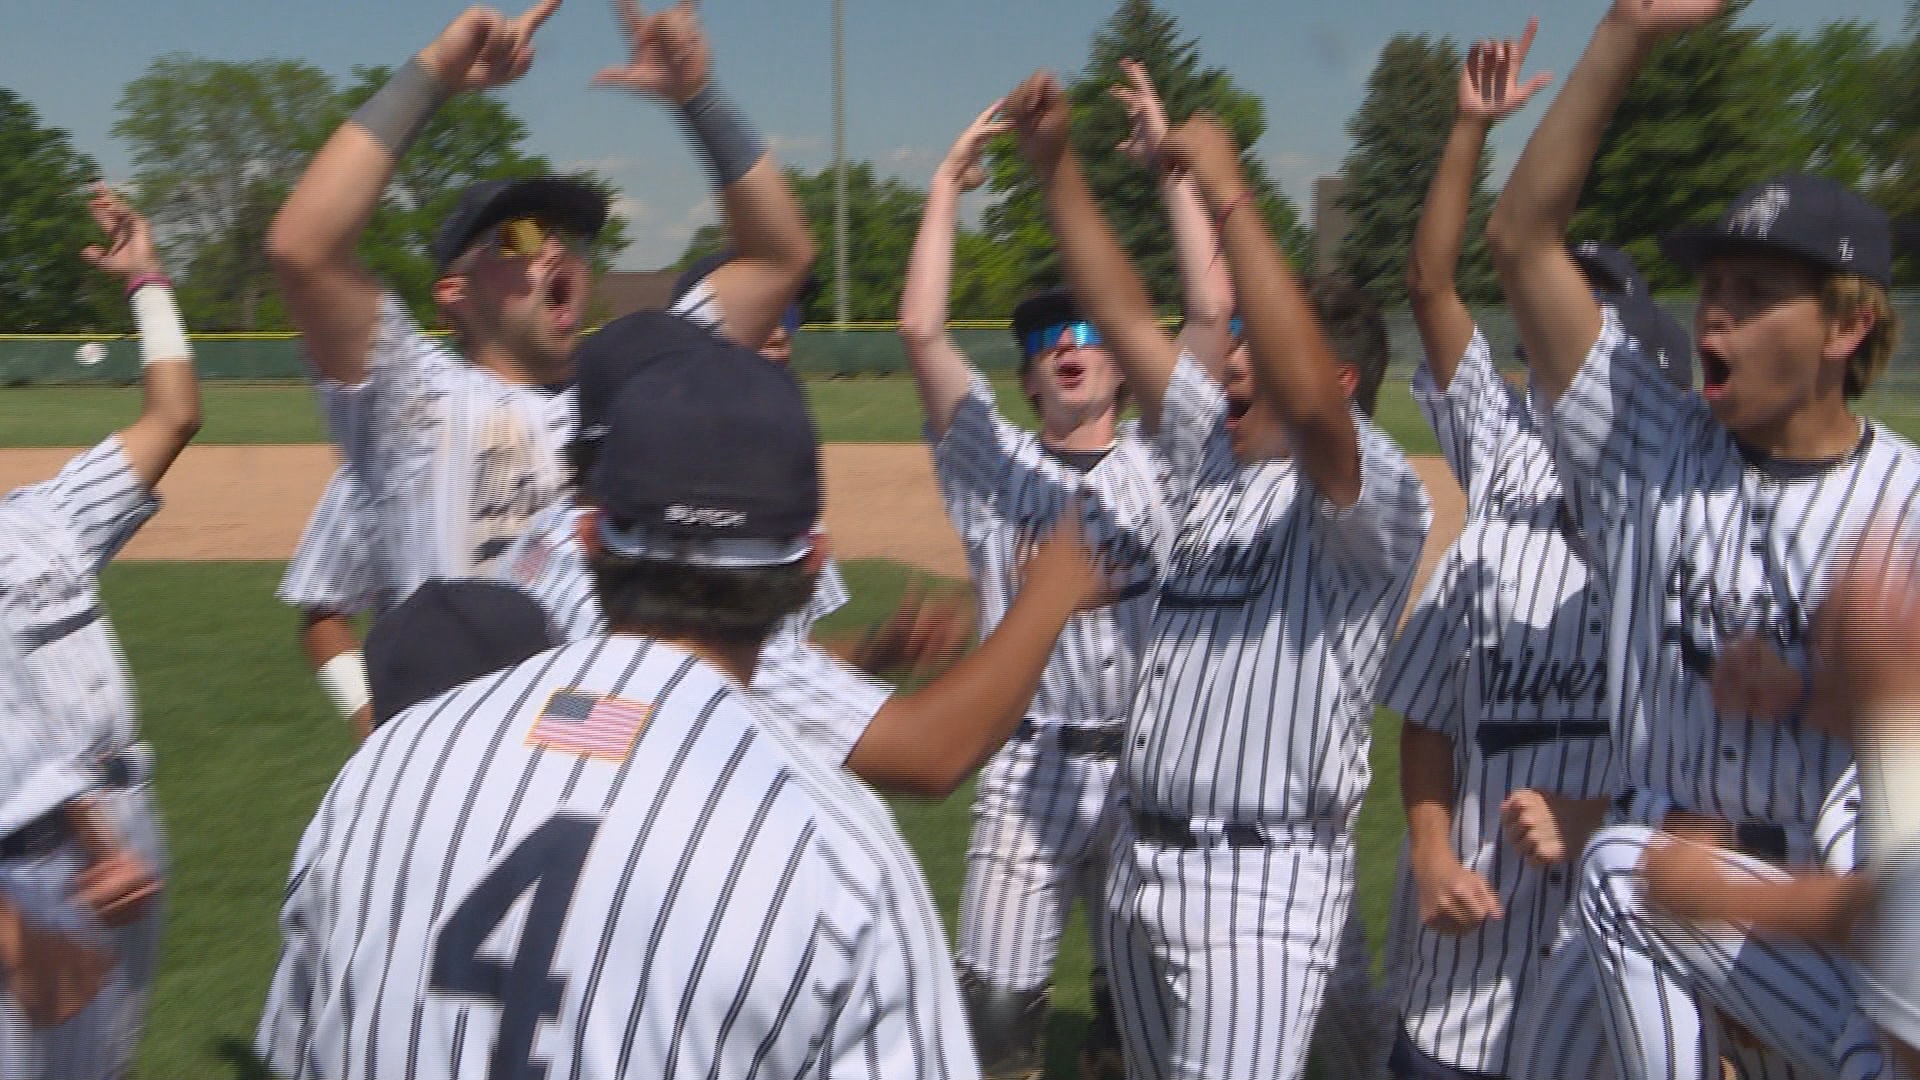 The Bulldogs defeated the Cougars 9-4 on Friday to advance to the Class 3A state title game.